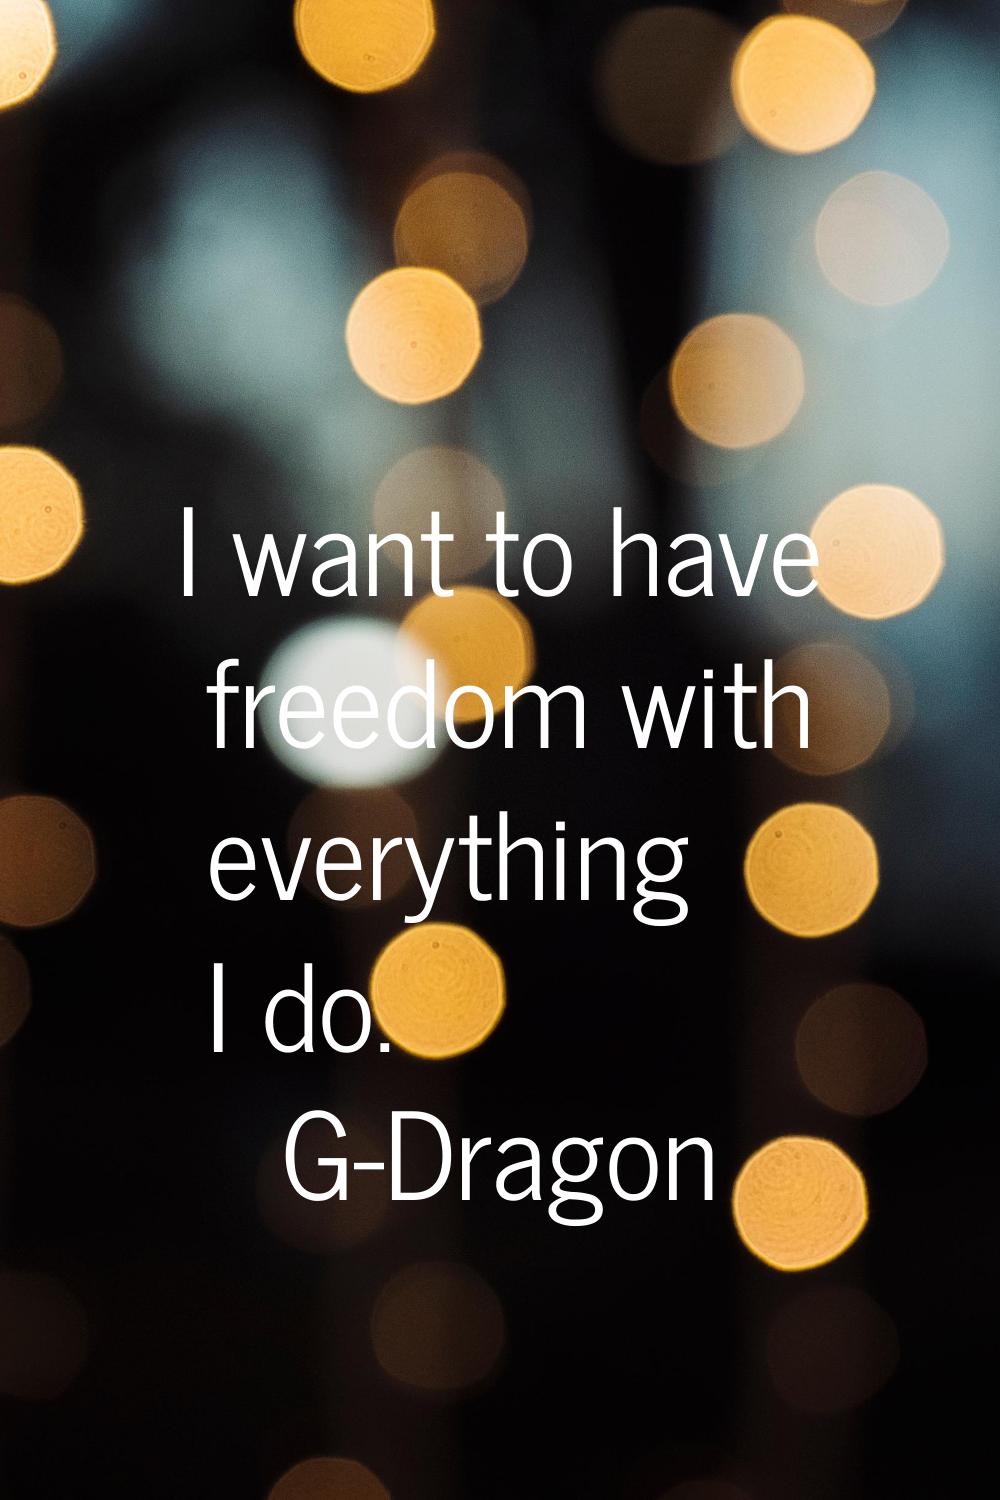 I want to have freedom with everything I do.